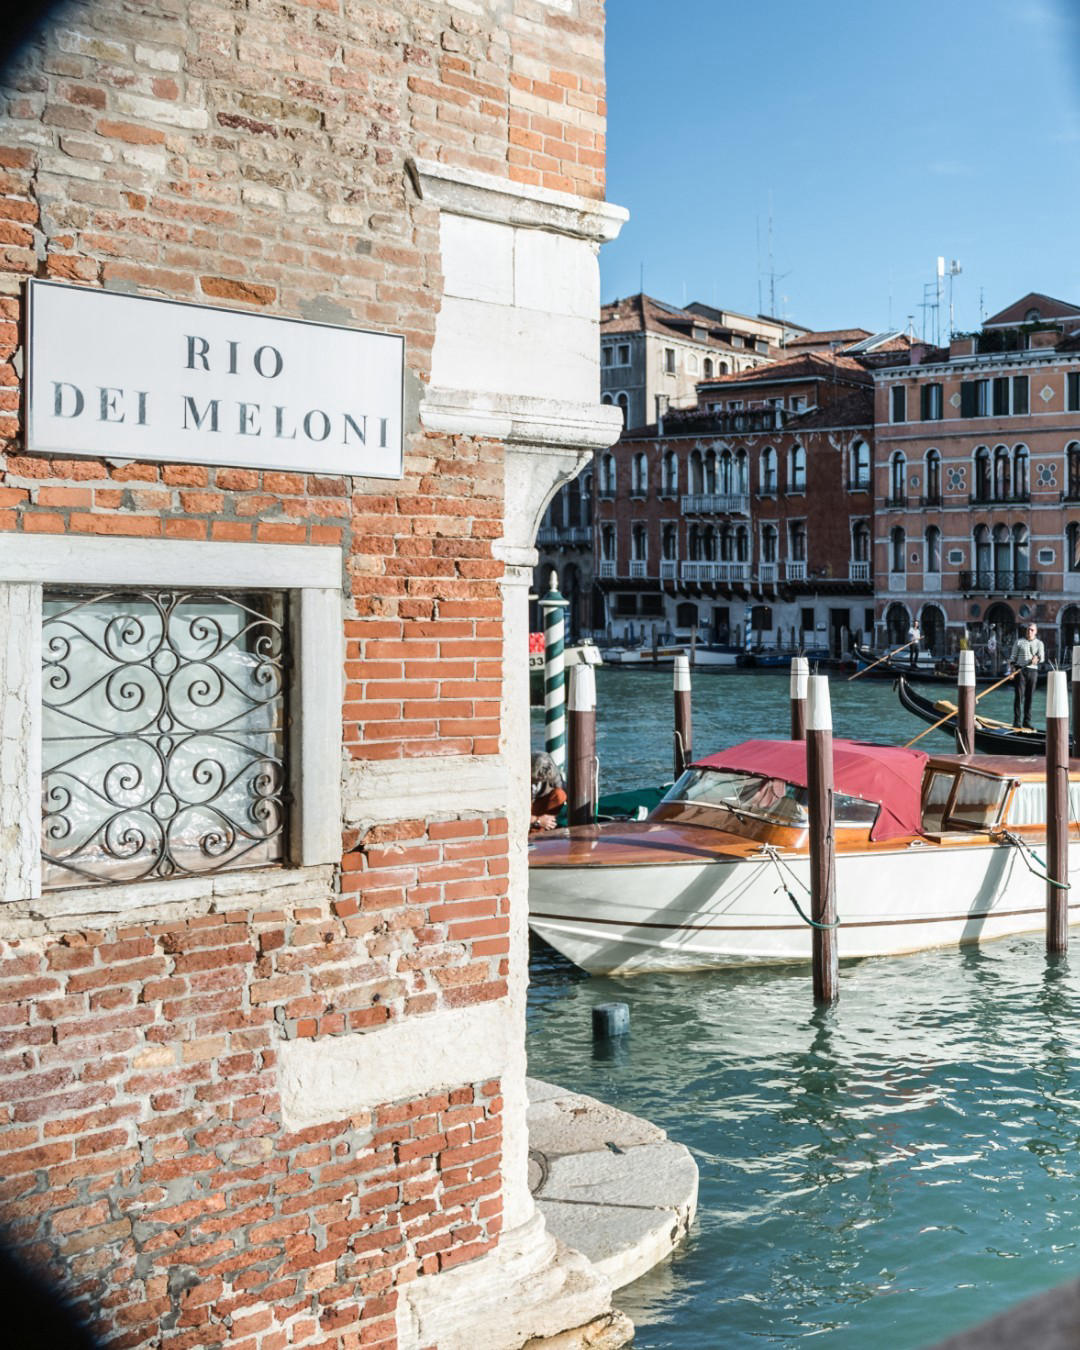 Aman Venice - From the legendary Piazzo San Marco and St Mark’s Basilica to the Palazzo Ducale and S